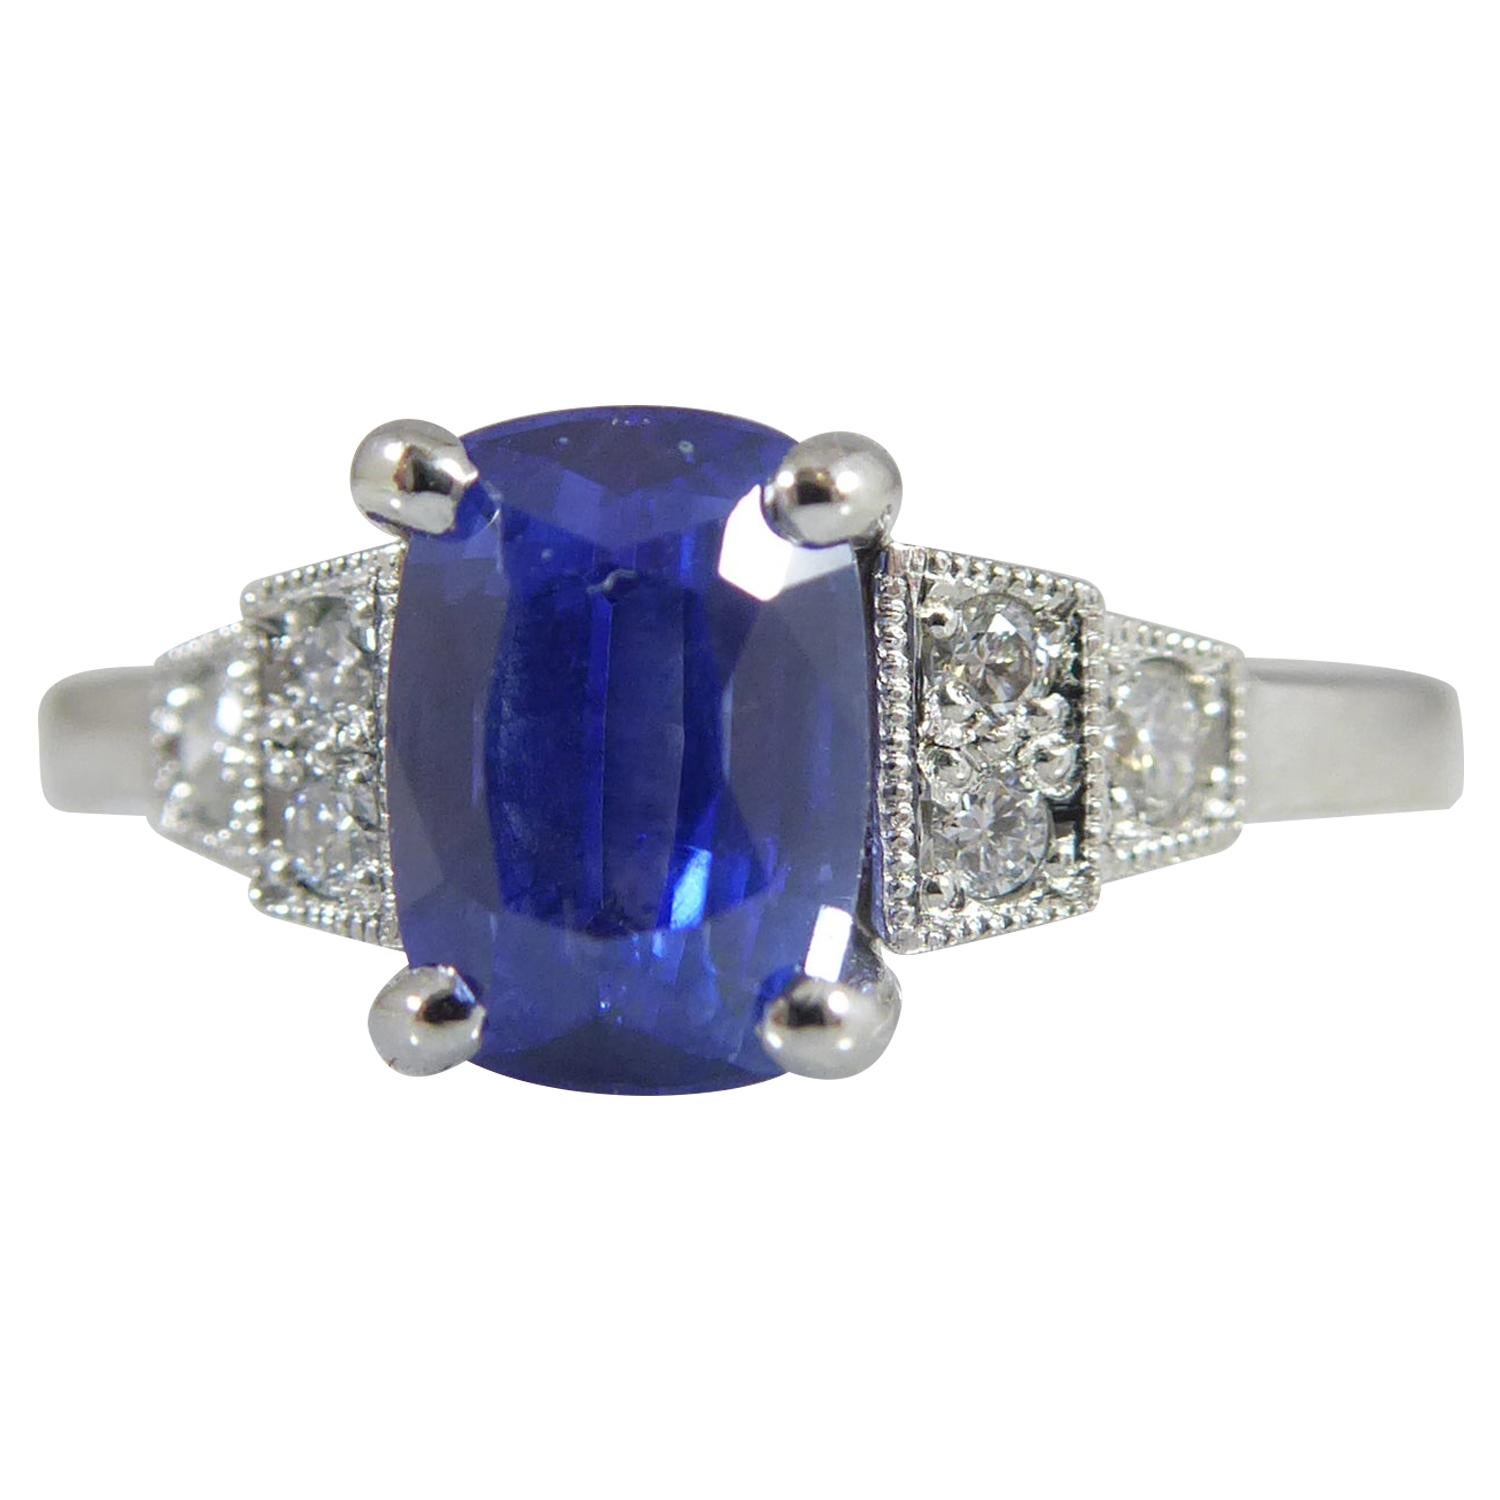 Art Deco Inspired Cushion Shaped Sapphire Ring with Diamond Shoulders